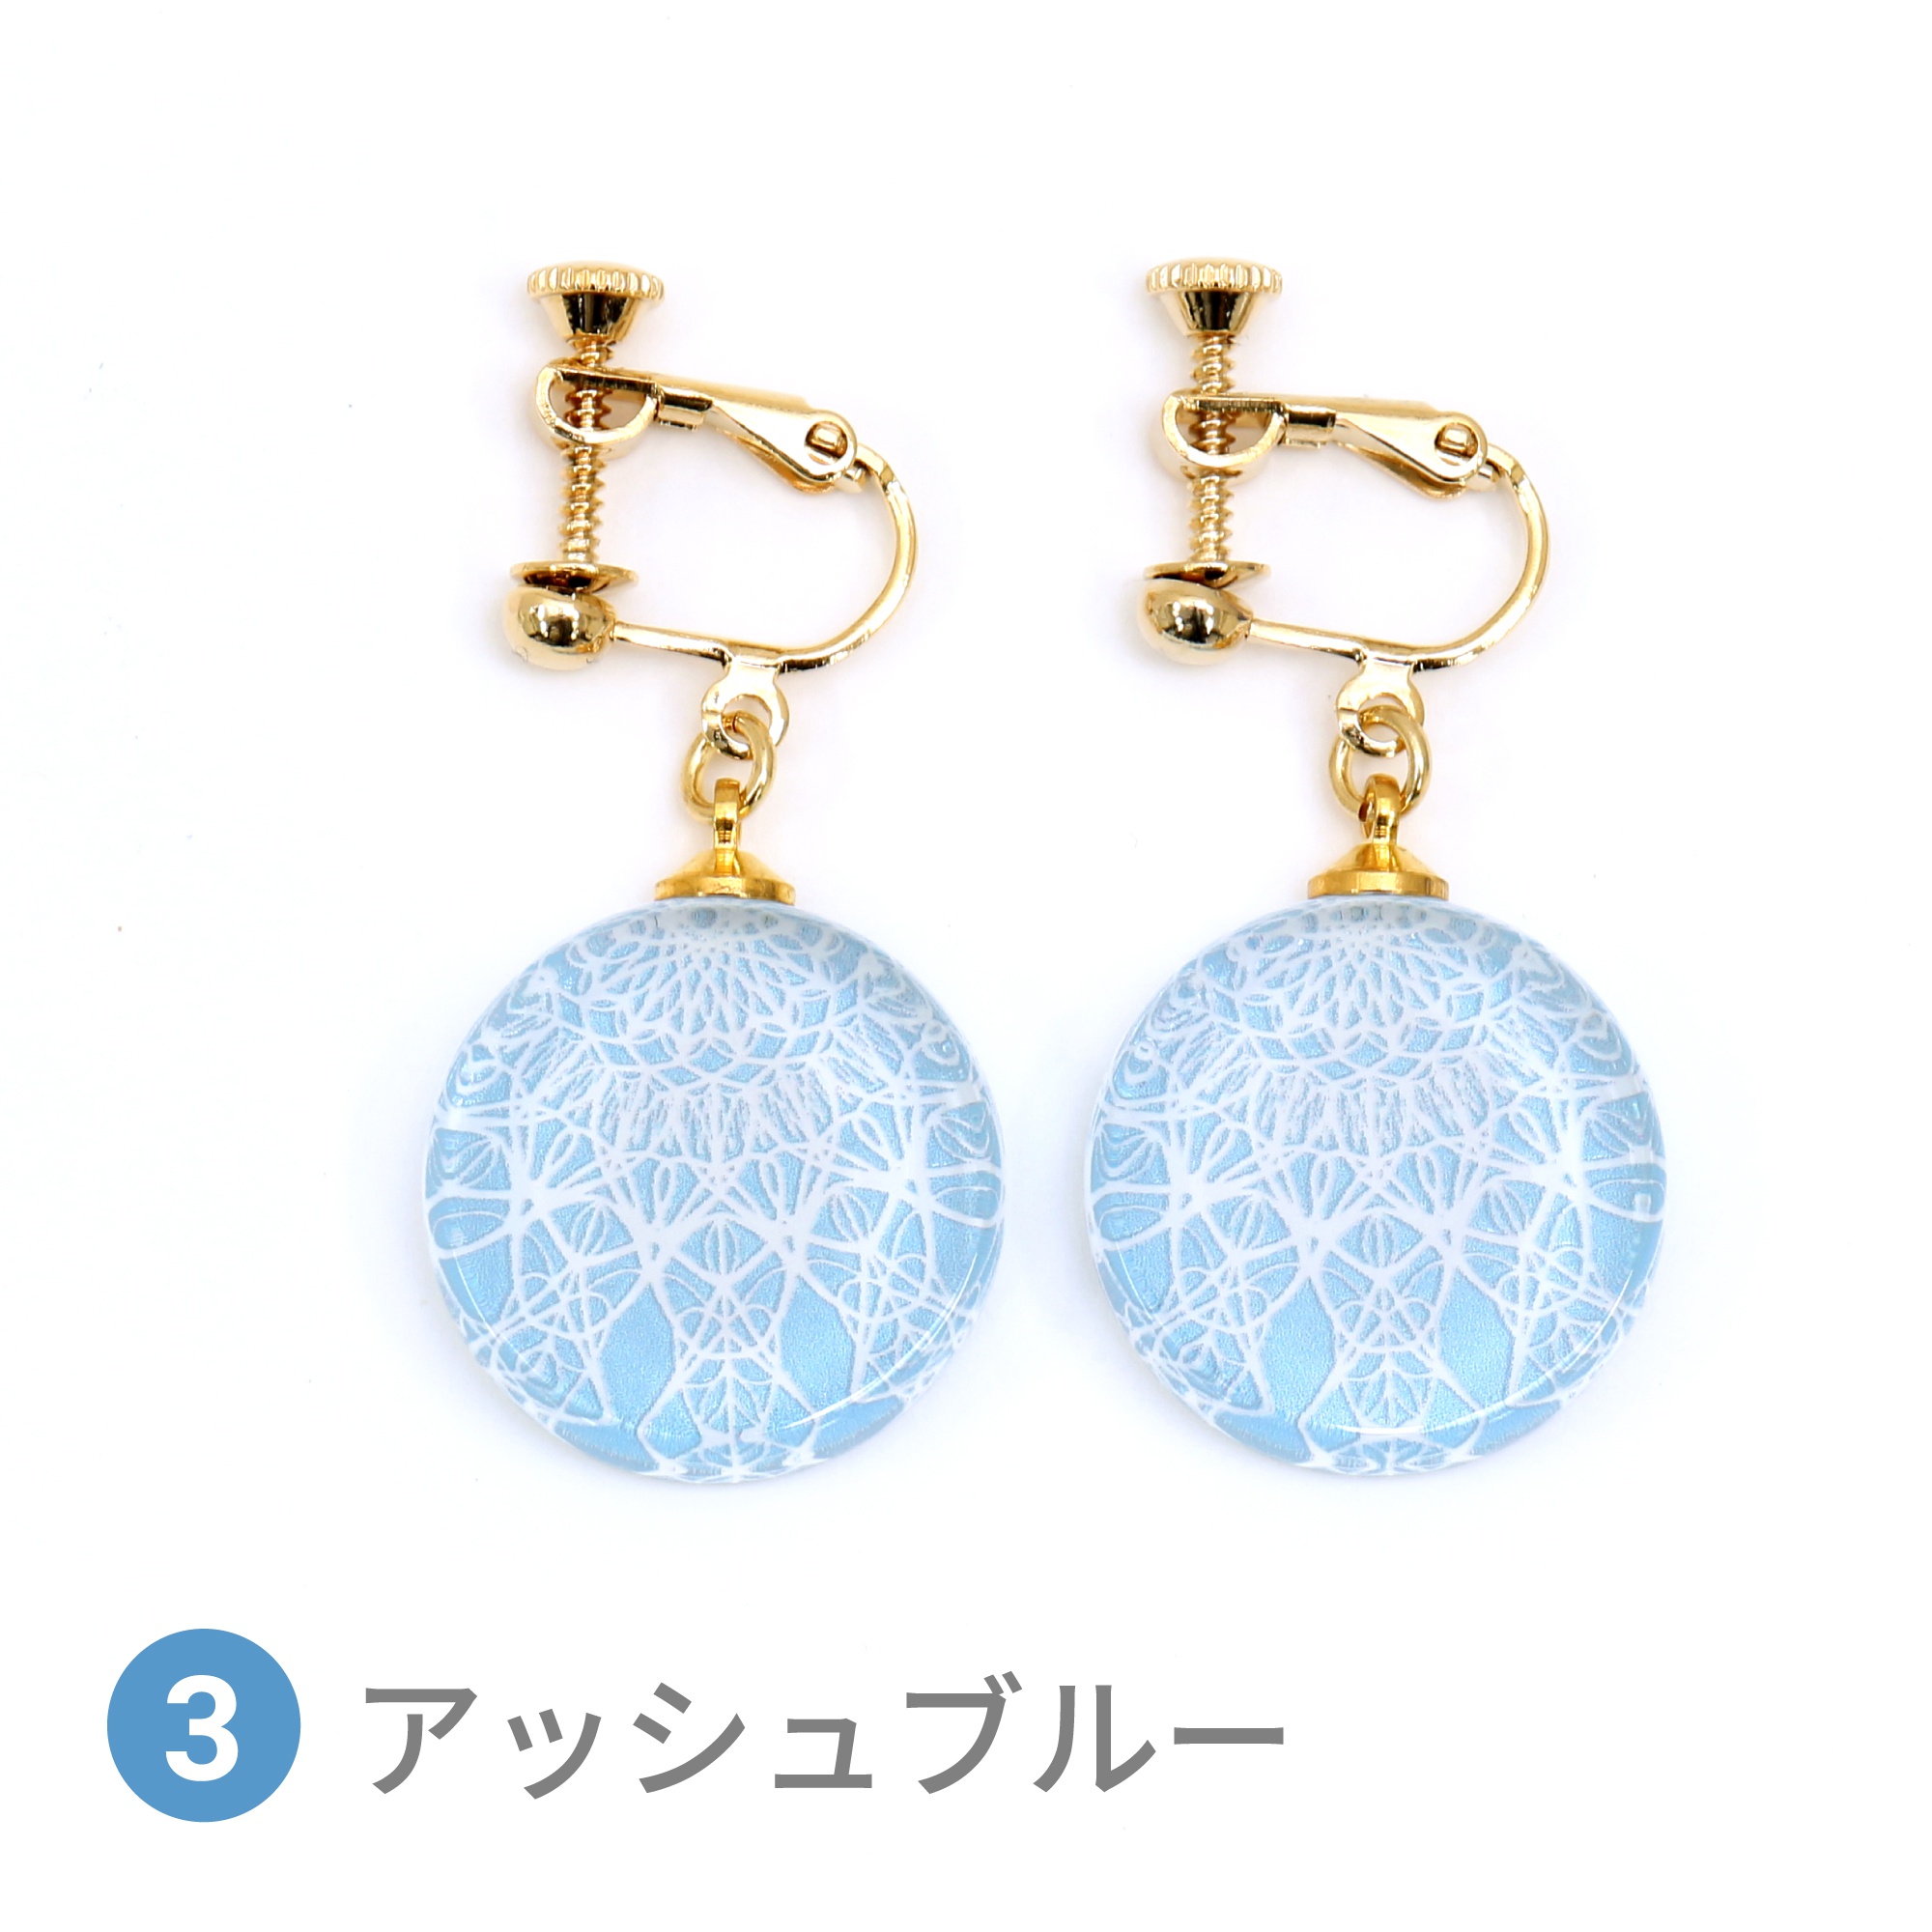 Glass accessories Earring LACE ashblue round shape